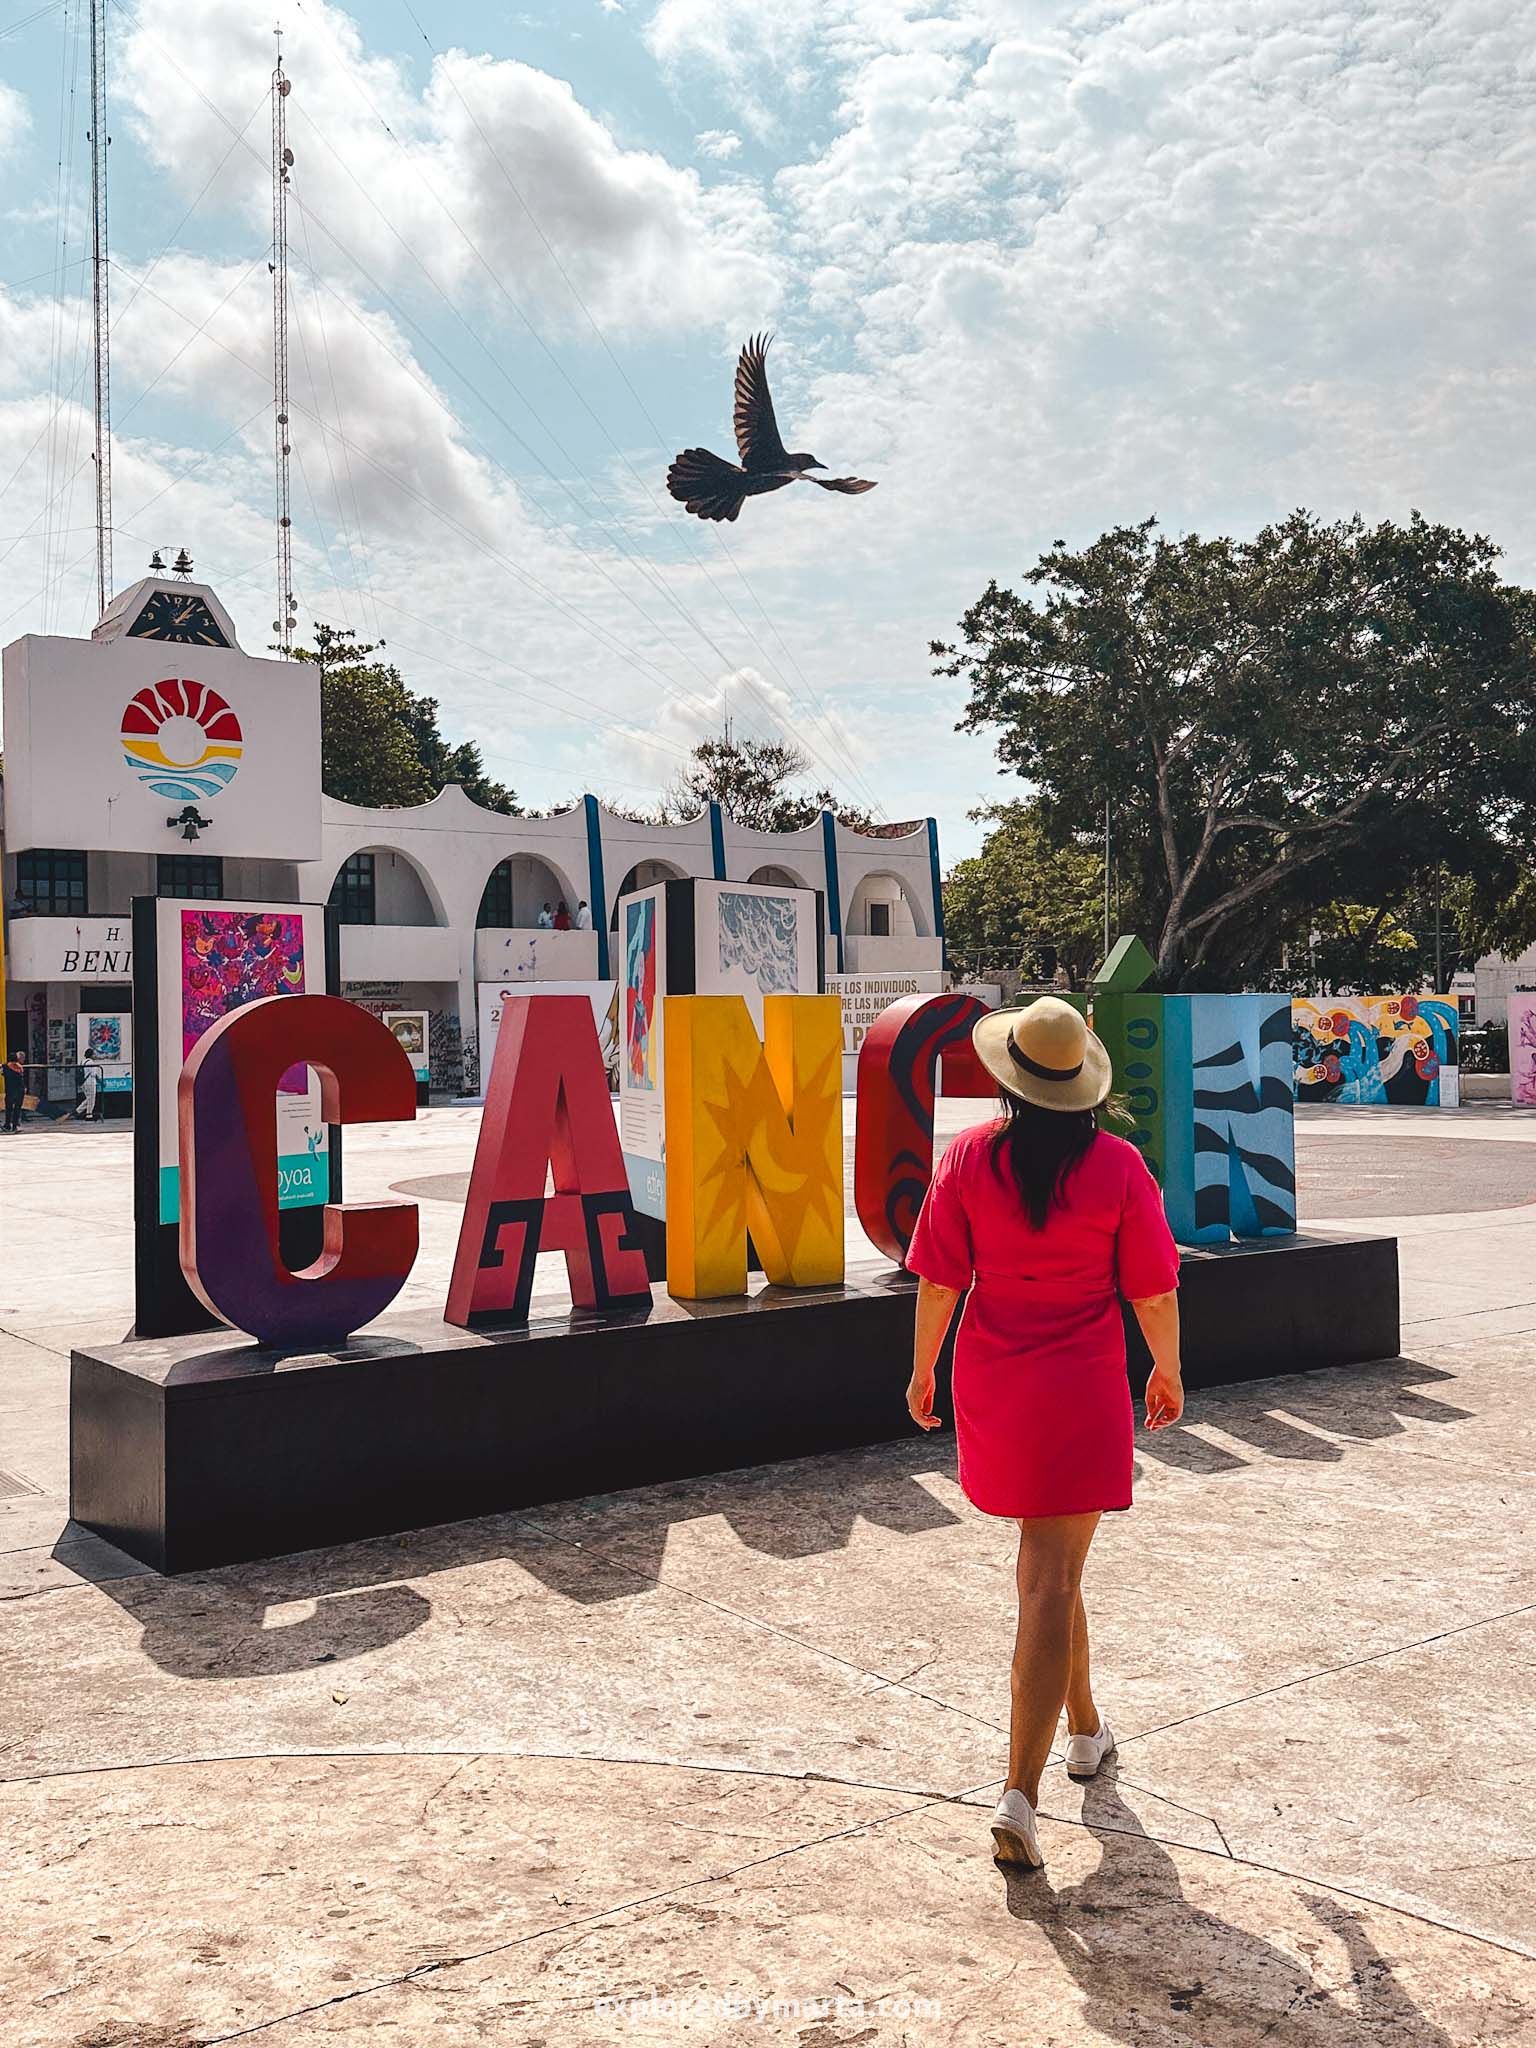 Cancun, Mexico - the colorful Cancun letters at Cancun downtown